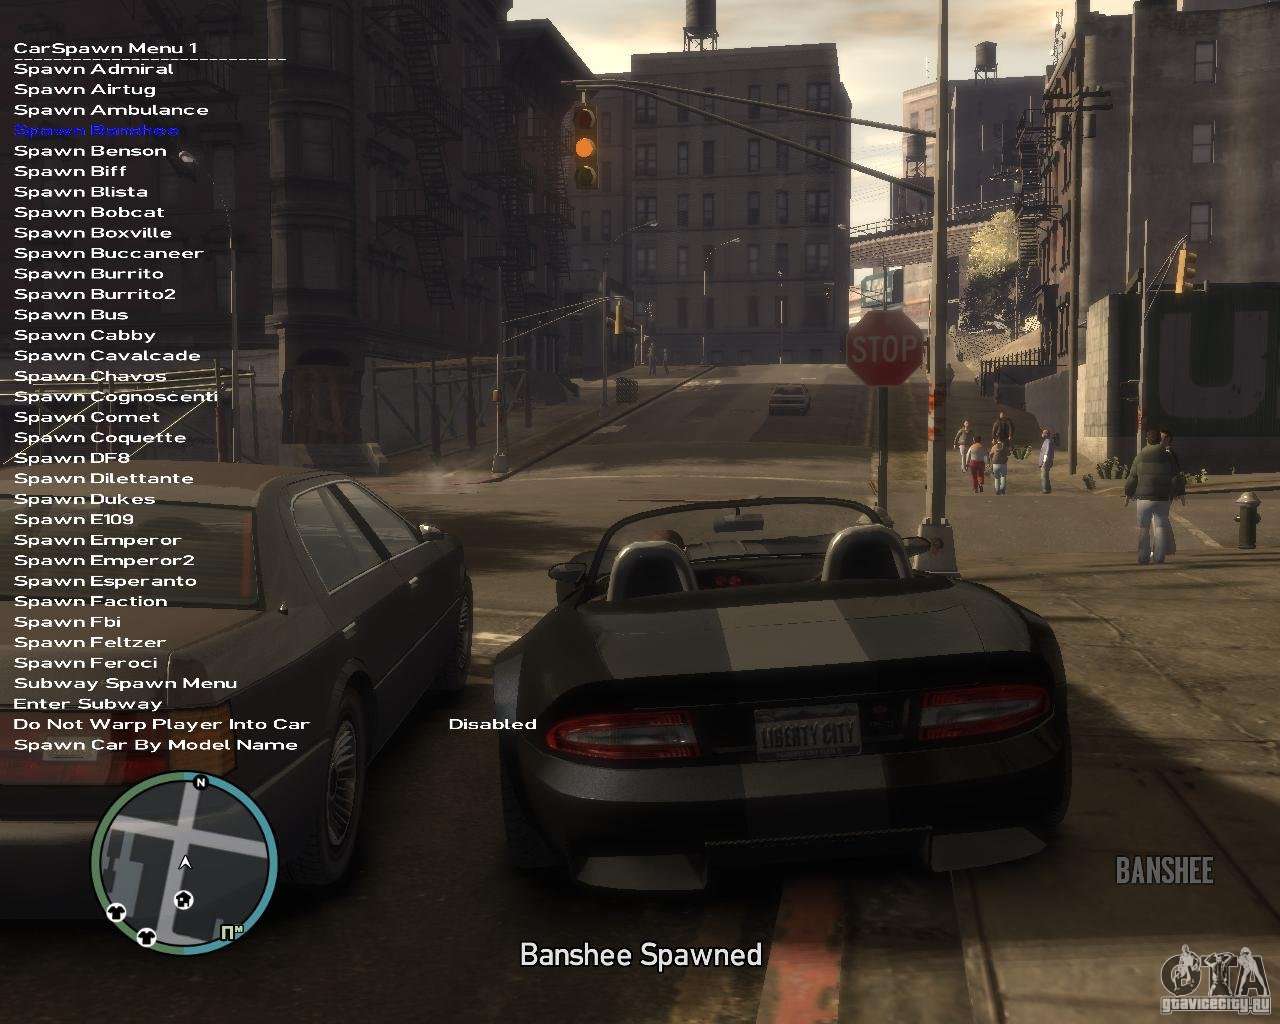 gta episodes from liberty city patch 1.1.2.0